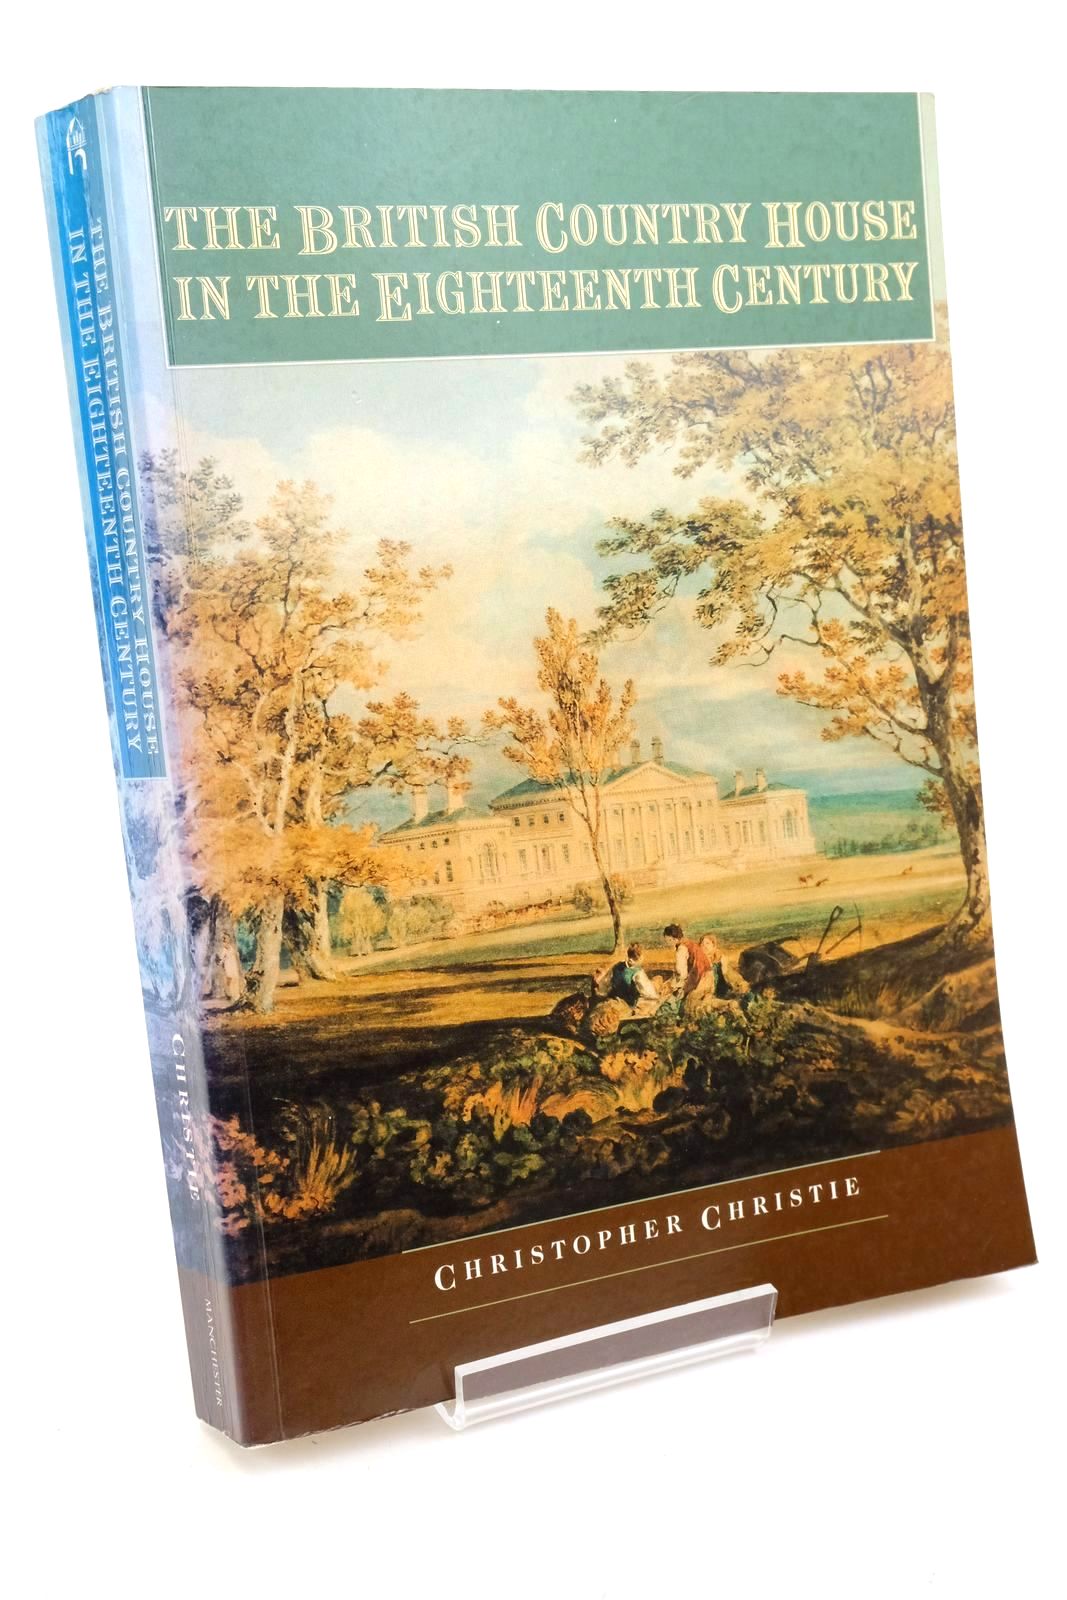 Photo of THE BRITISH COUNTRY HOUSE IN THE EIGHTEENTH CENTURY written by Christie, Christopher published by Manchester University Press (STOCK CODE: 1322422)  for sale by Stella & Rose's Books